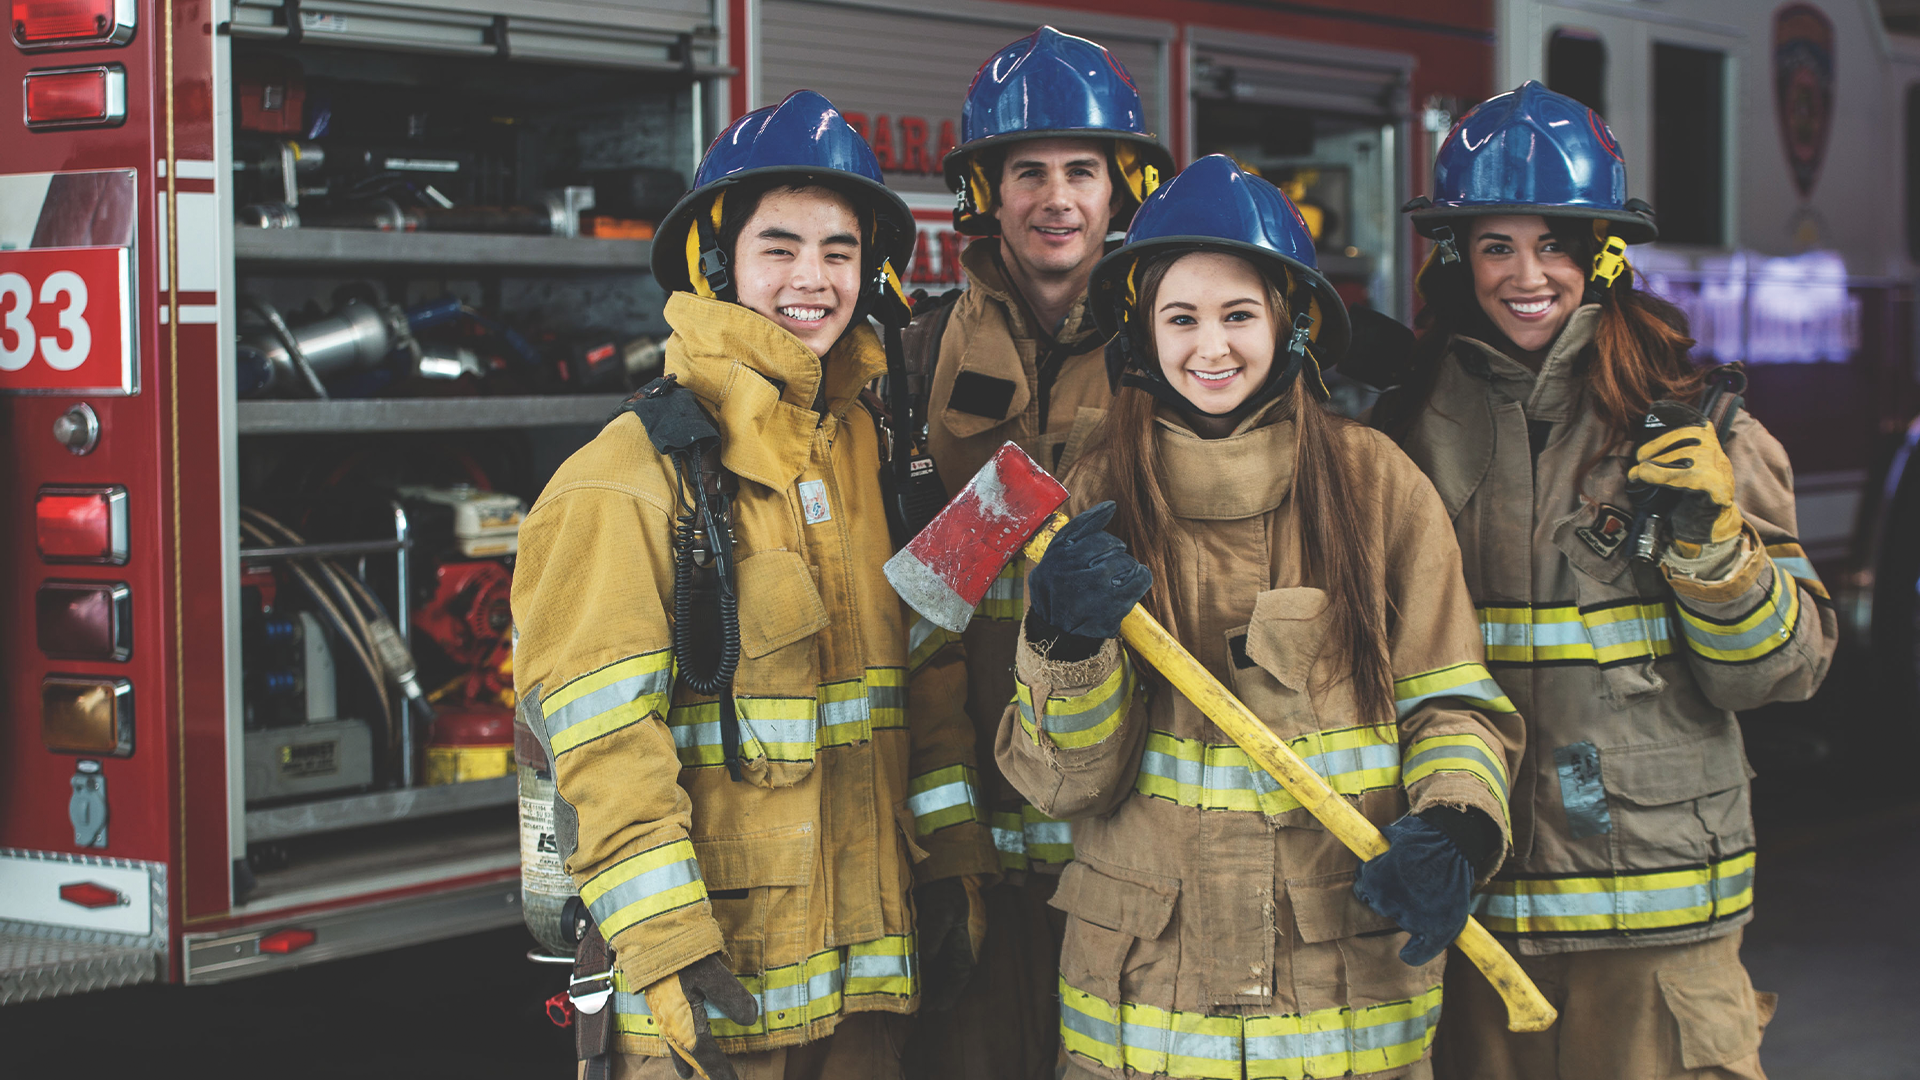 4 people all wearing firefighter uniforms pose in front of a fire truck. The two people in the back are professional firefighters, while the two in front are Explorer Scouts.